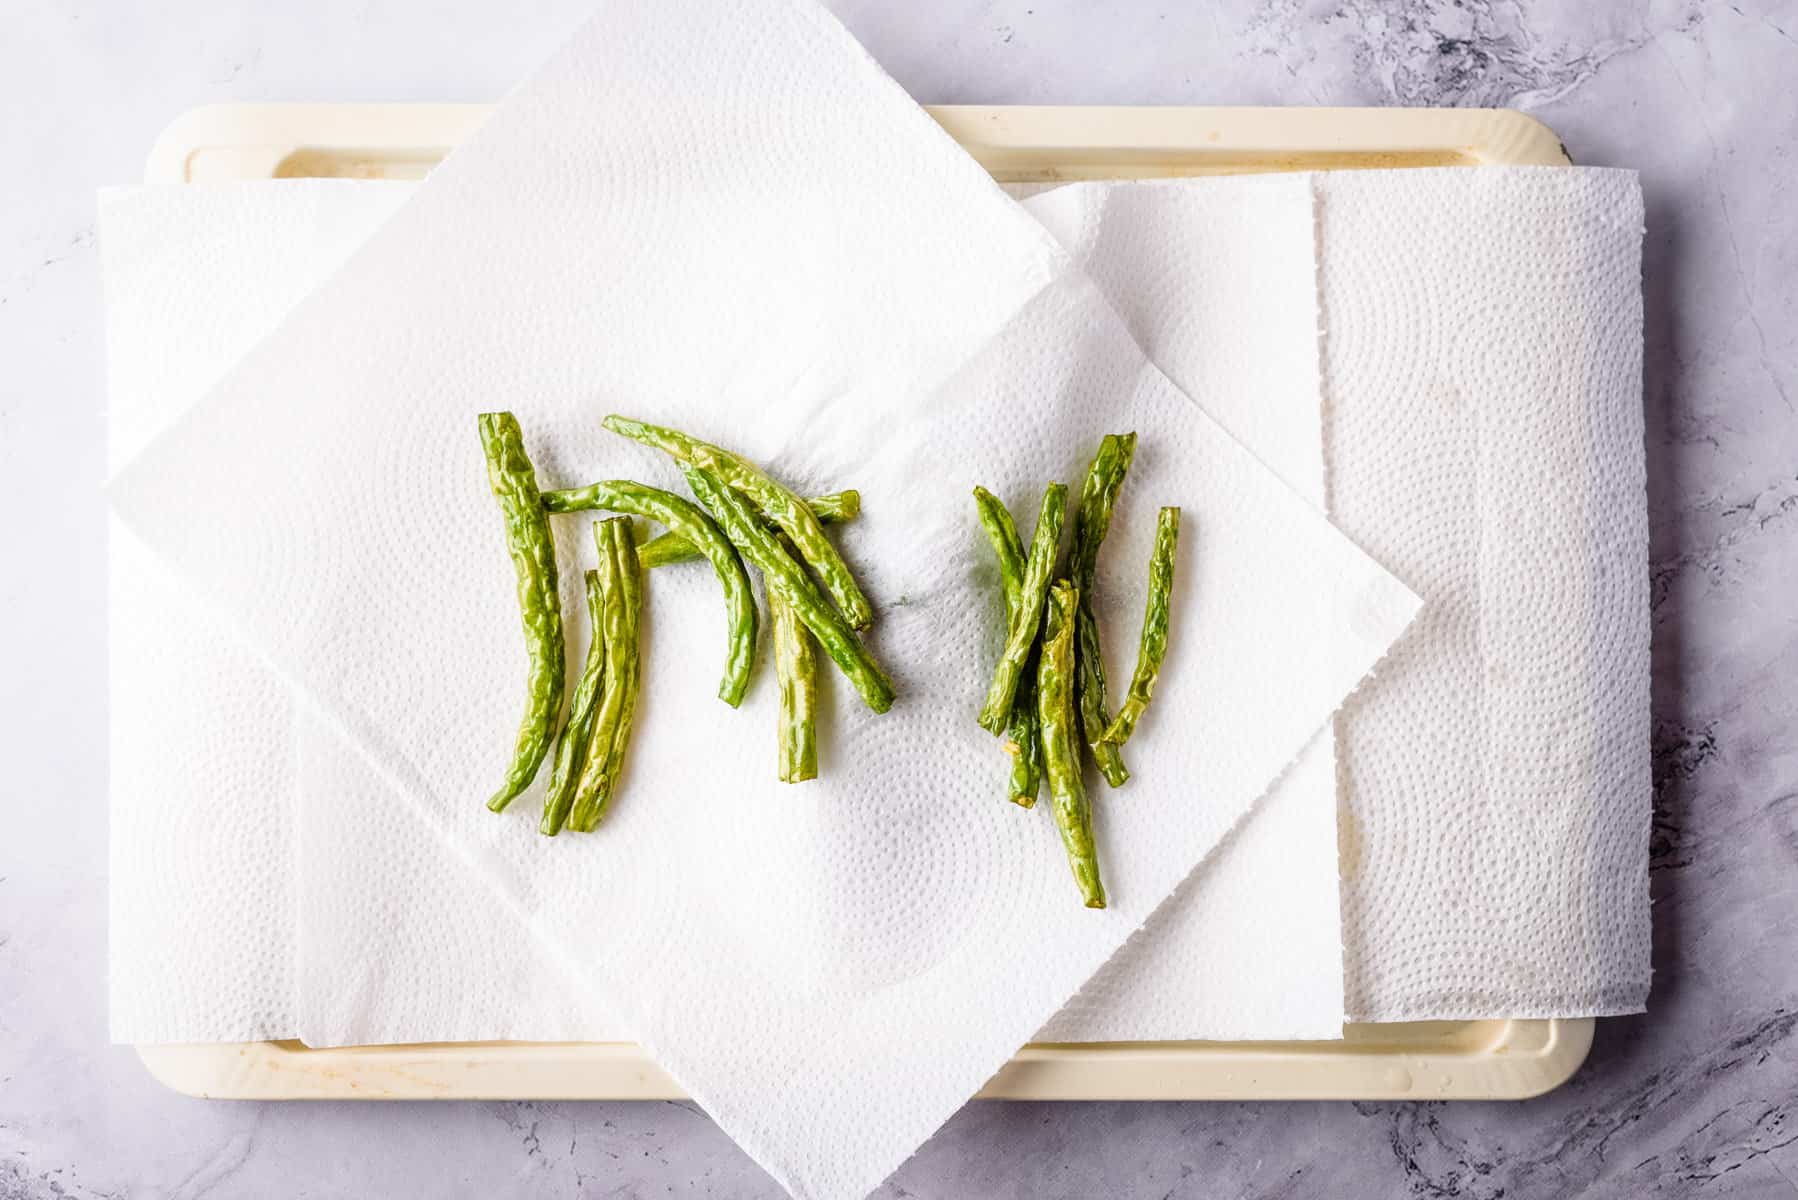 Overhead view of green beans placed on a paper towel on a platter.